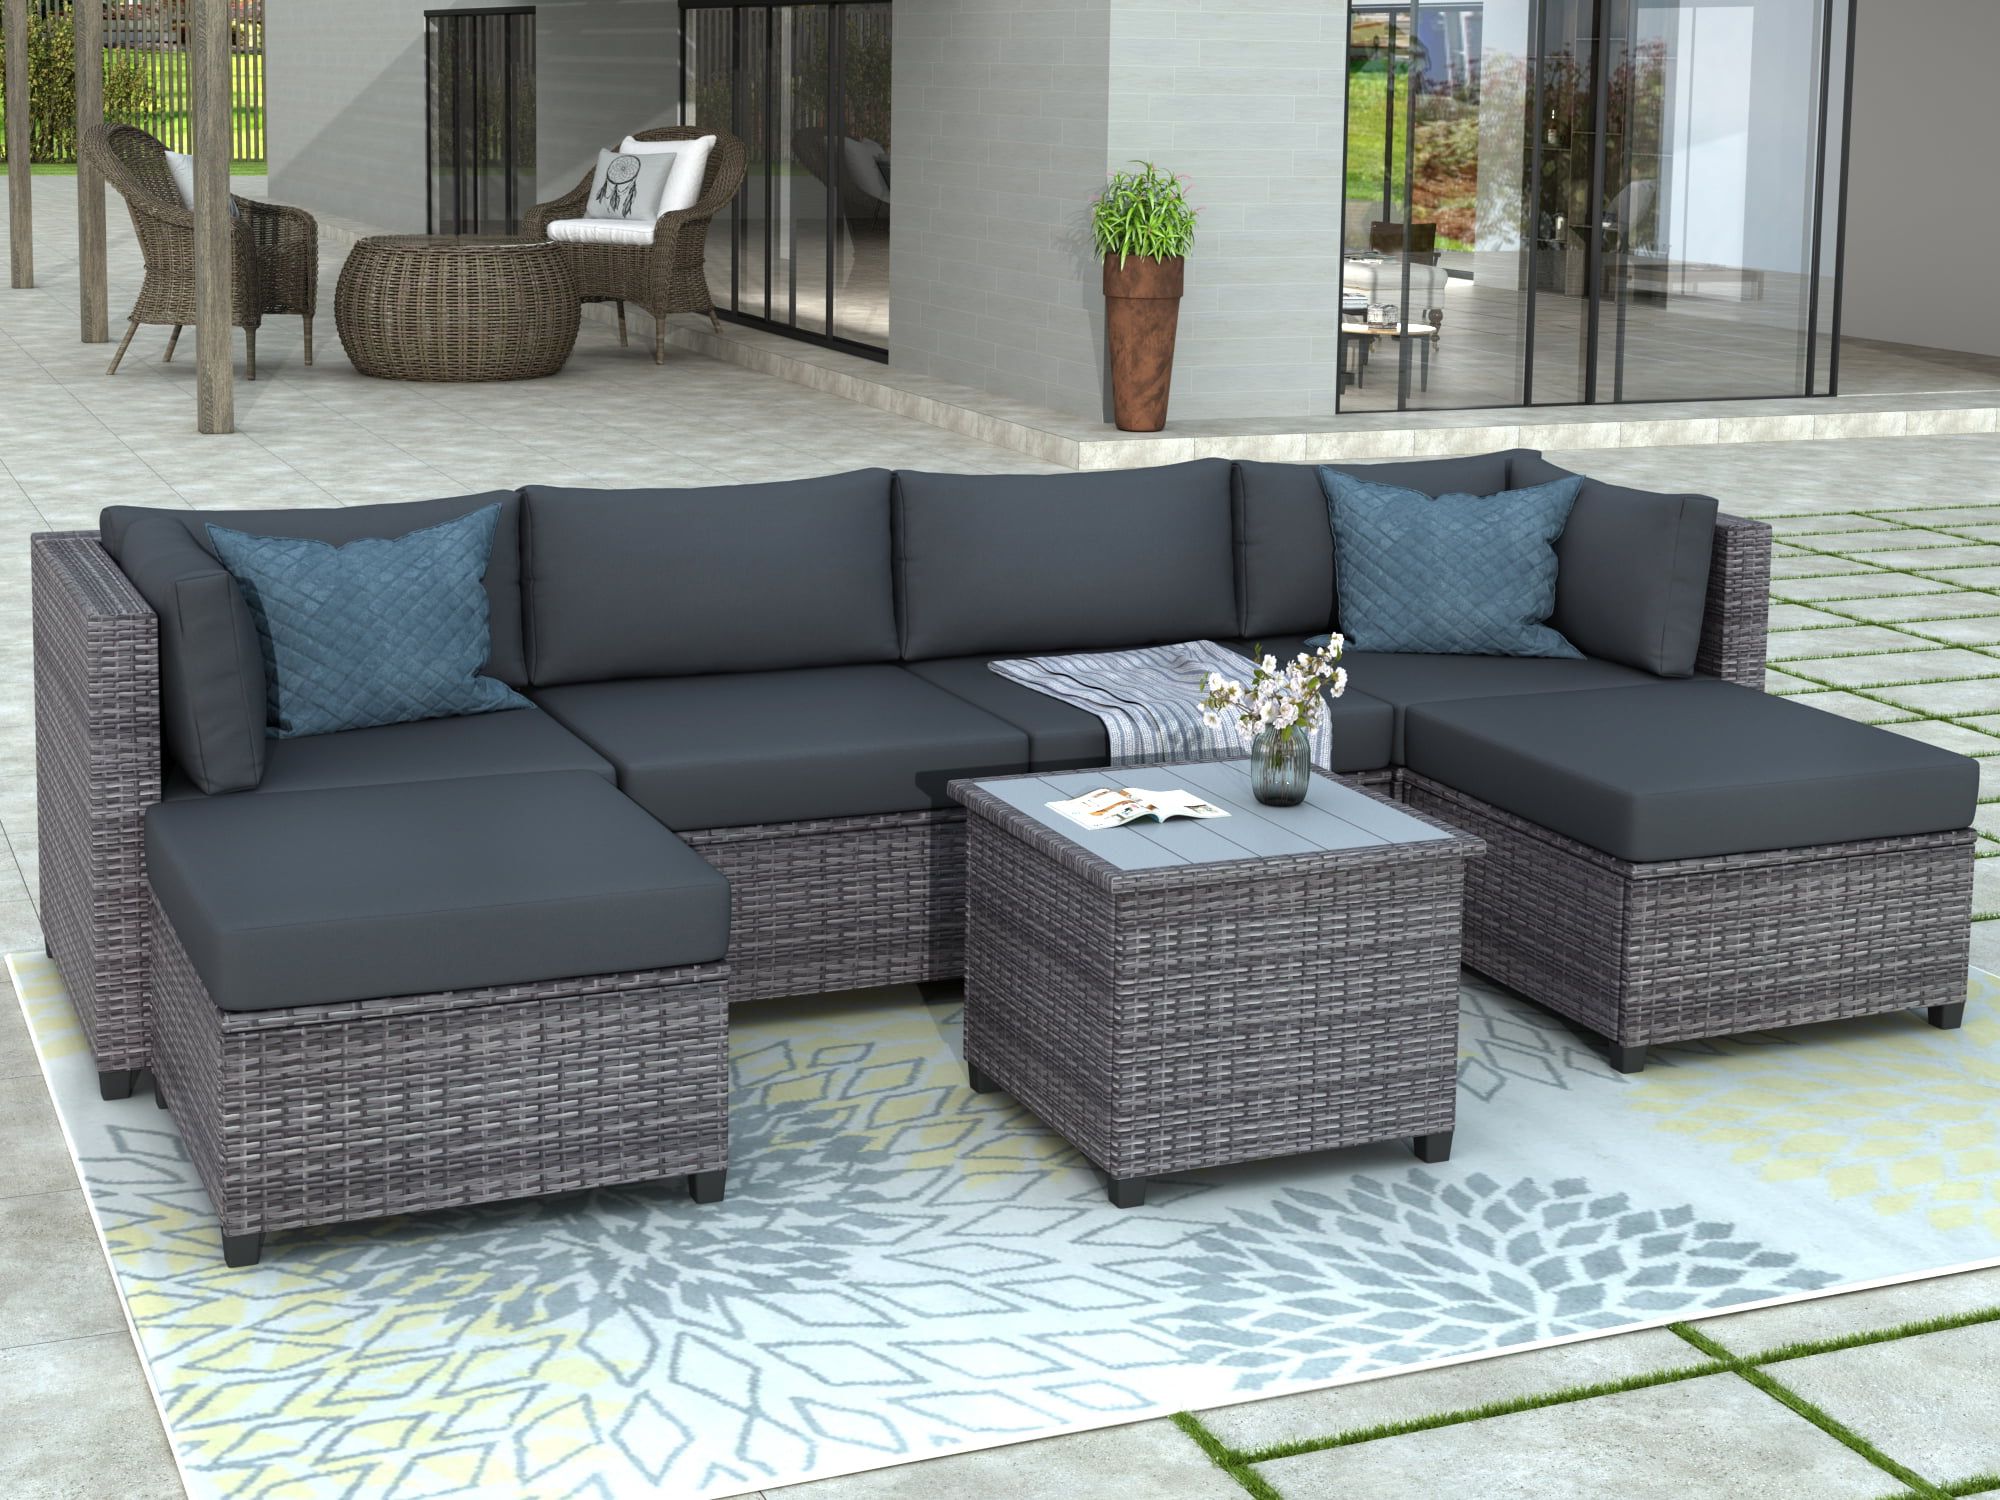 Outdoor Rattan Sectional Sofas With Coffee Table Throughout Most Popular 7 Piece Patio Sectional Sofa Set With 4 Rattan Wicker Chairs, 2 Ottoman, Coffee  Table, All Weather Outdoor Conversation Set With Gray Cushions For  Backyard, Porch, Garden, Poolside, L5018 – Walmart (View 2 of 15)